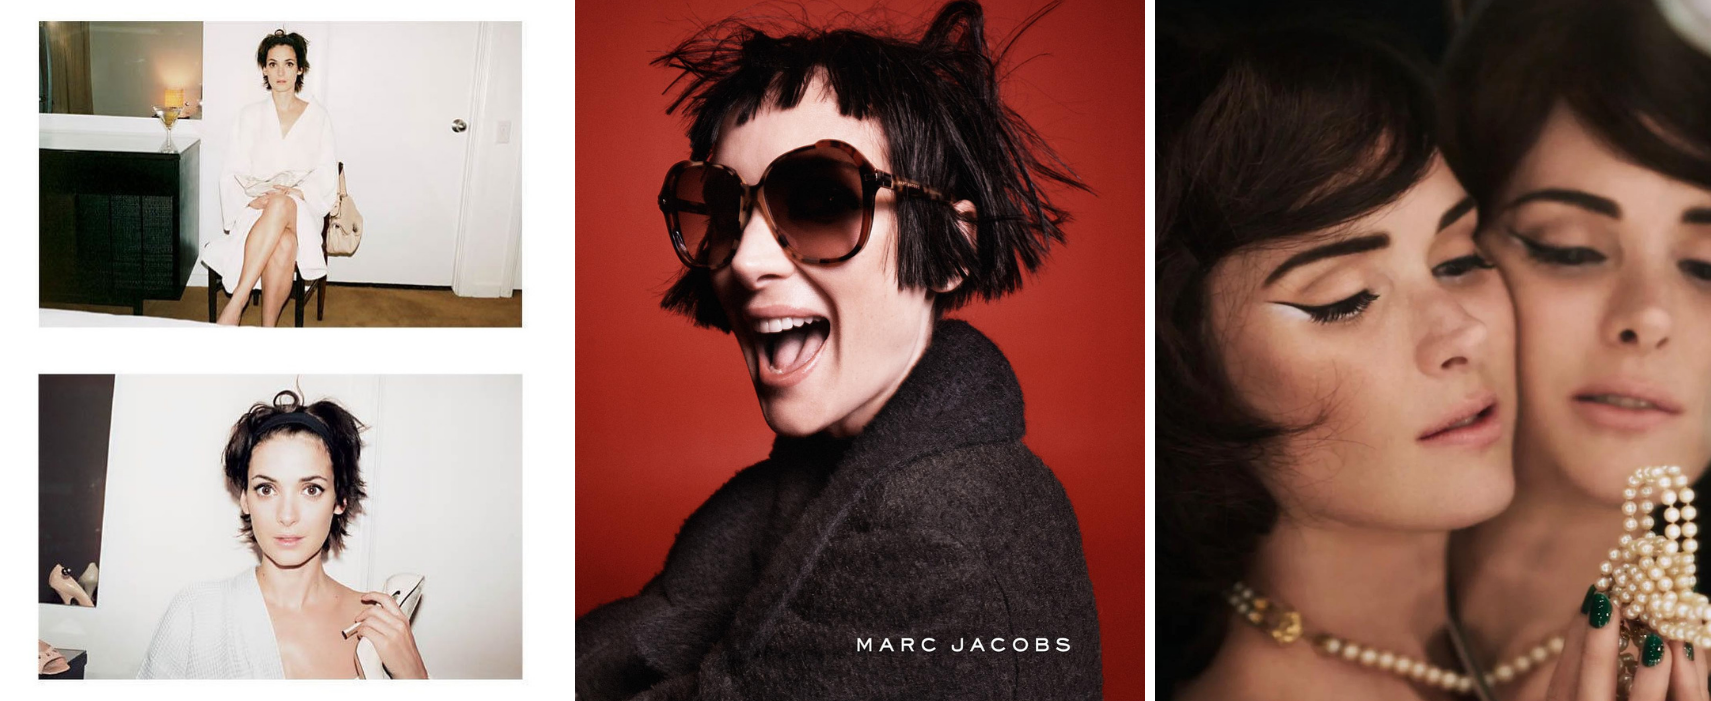 Winona Ryder Stars in Marc Jacobs Ads, A Brief History of Their Friendship